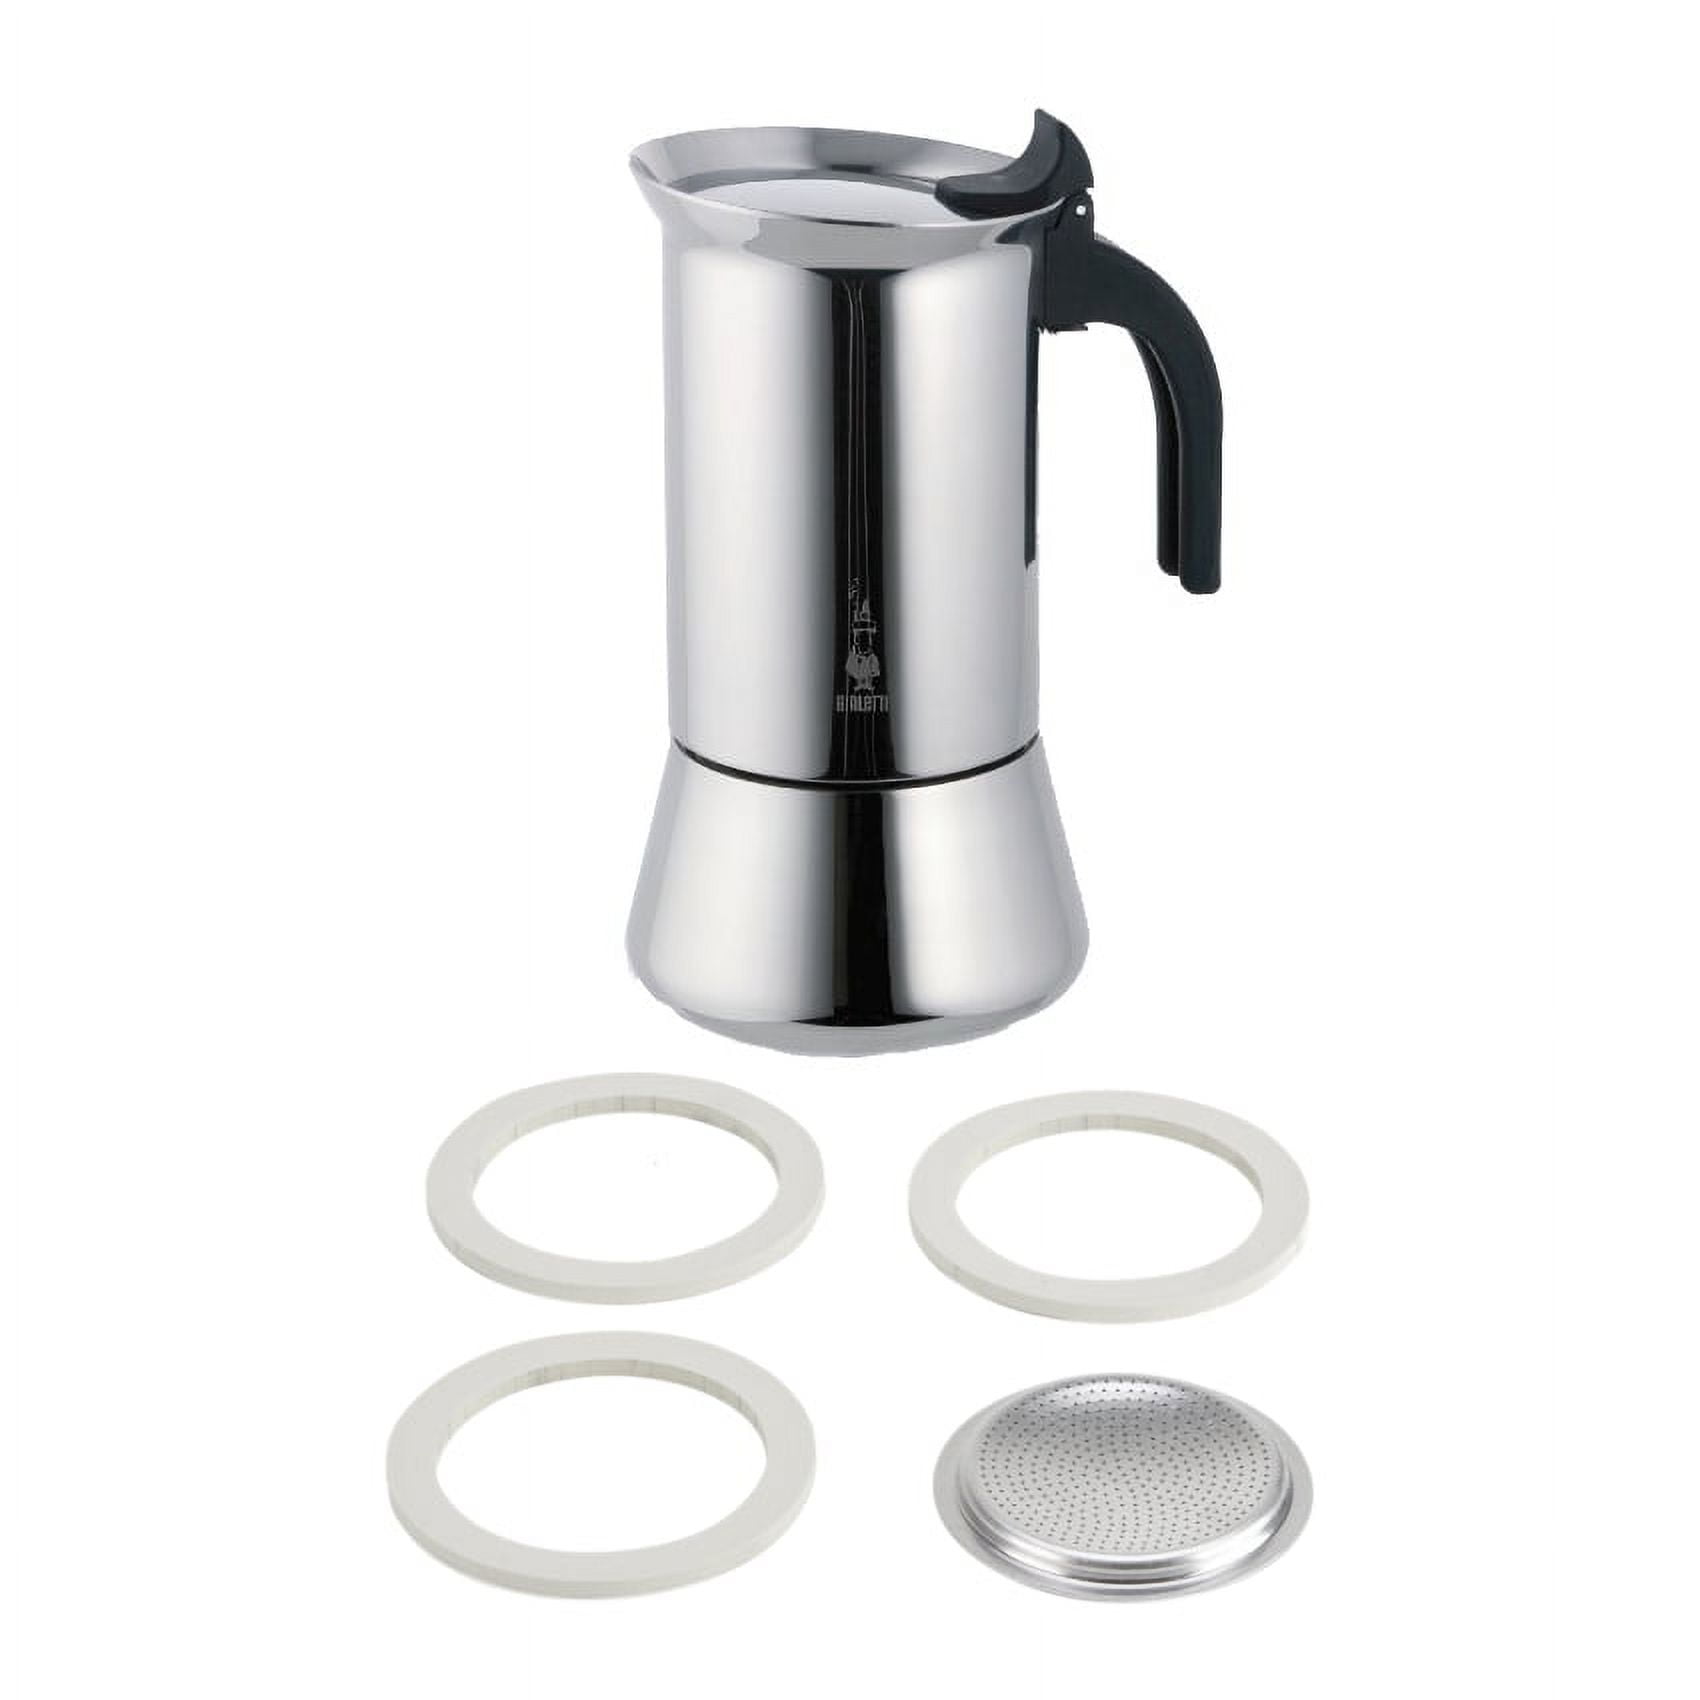 Bialetti venus Stovetop espresso coffee maker, 6 -Cup, Stainless Steel 